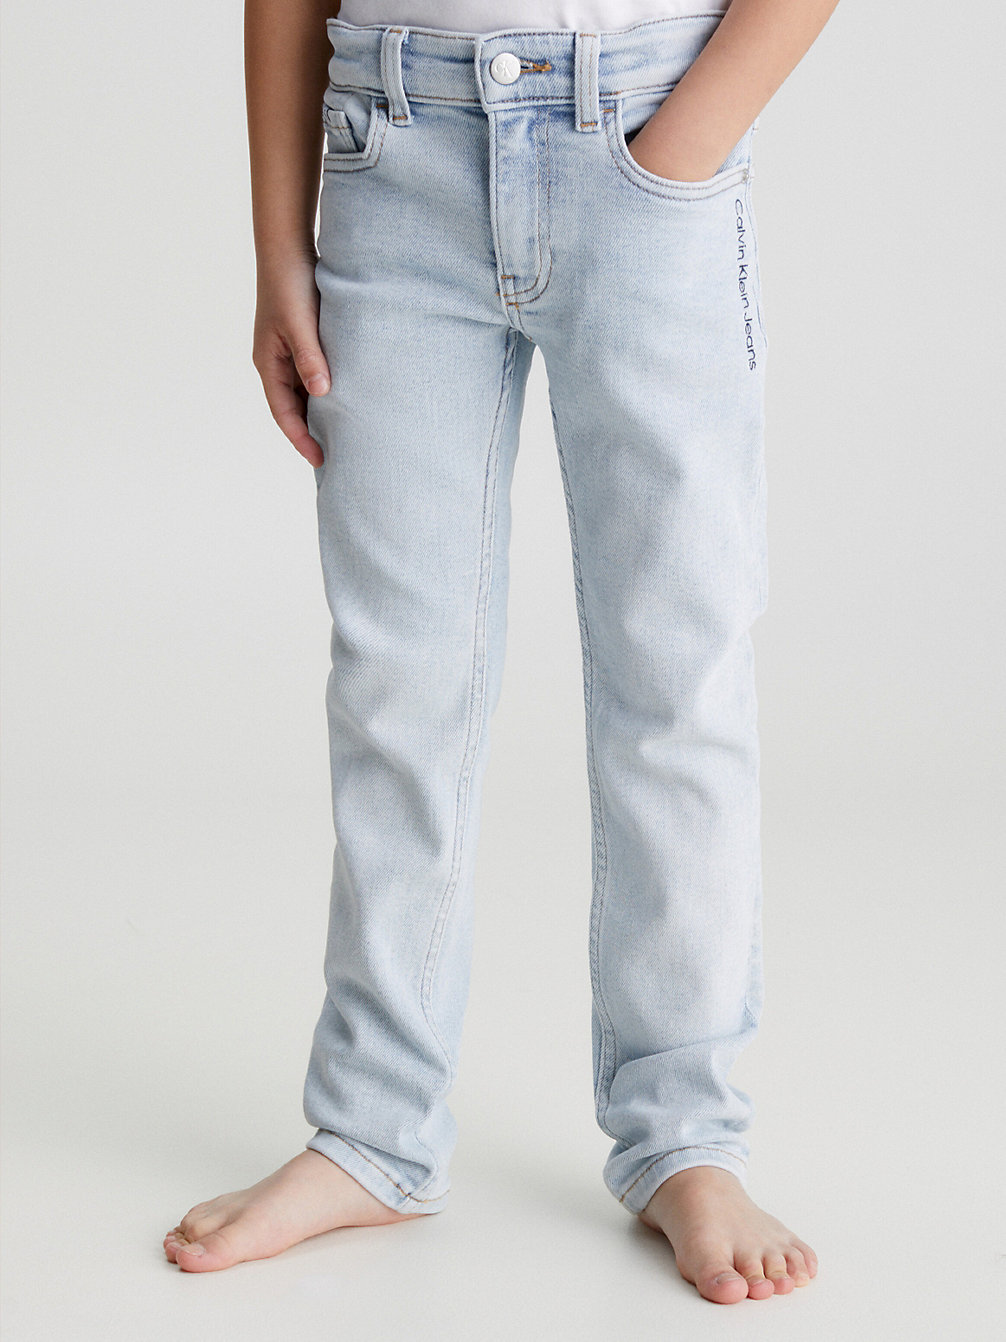 LIGHT BLEACHED STRETCH > Jeansy Mid Rise Slim > undefined boys - Calvin Klein